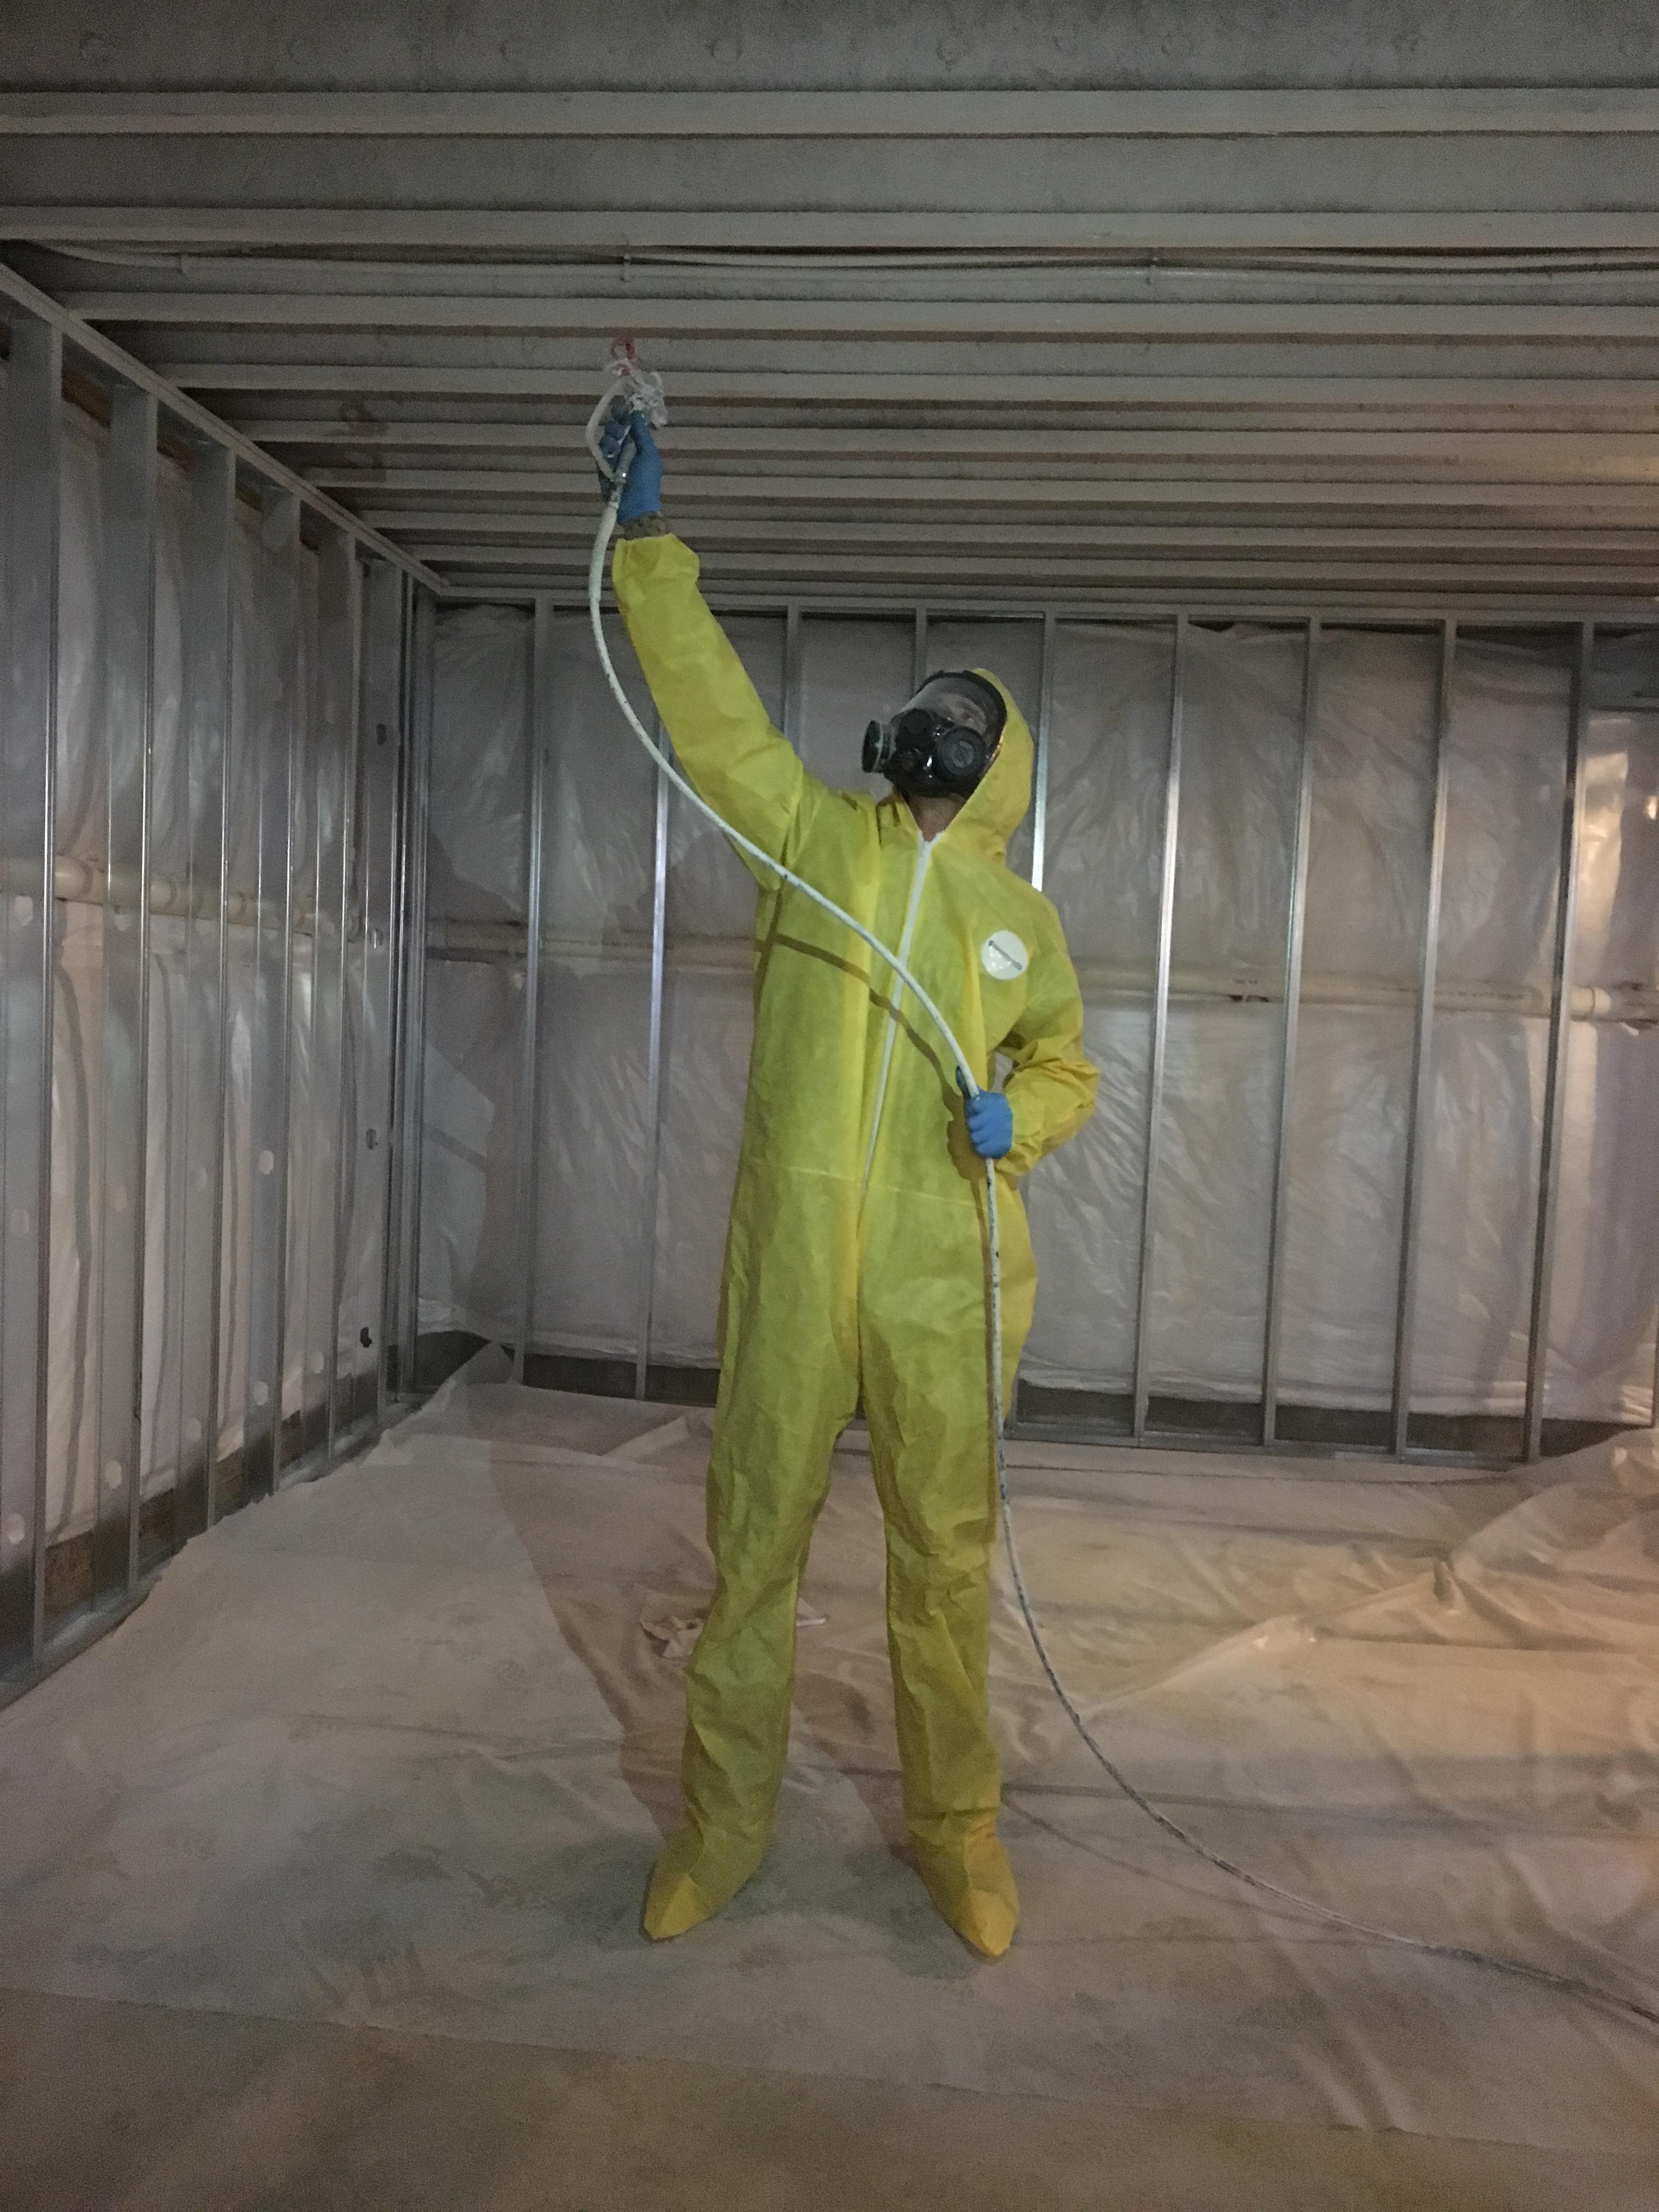 How do you remediate mold